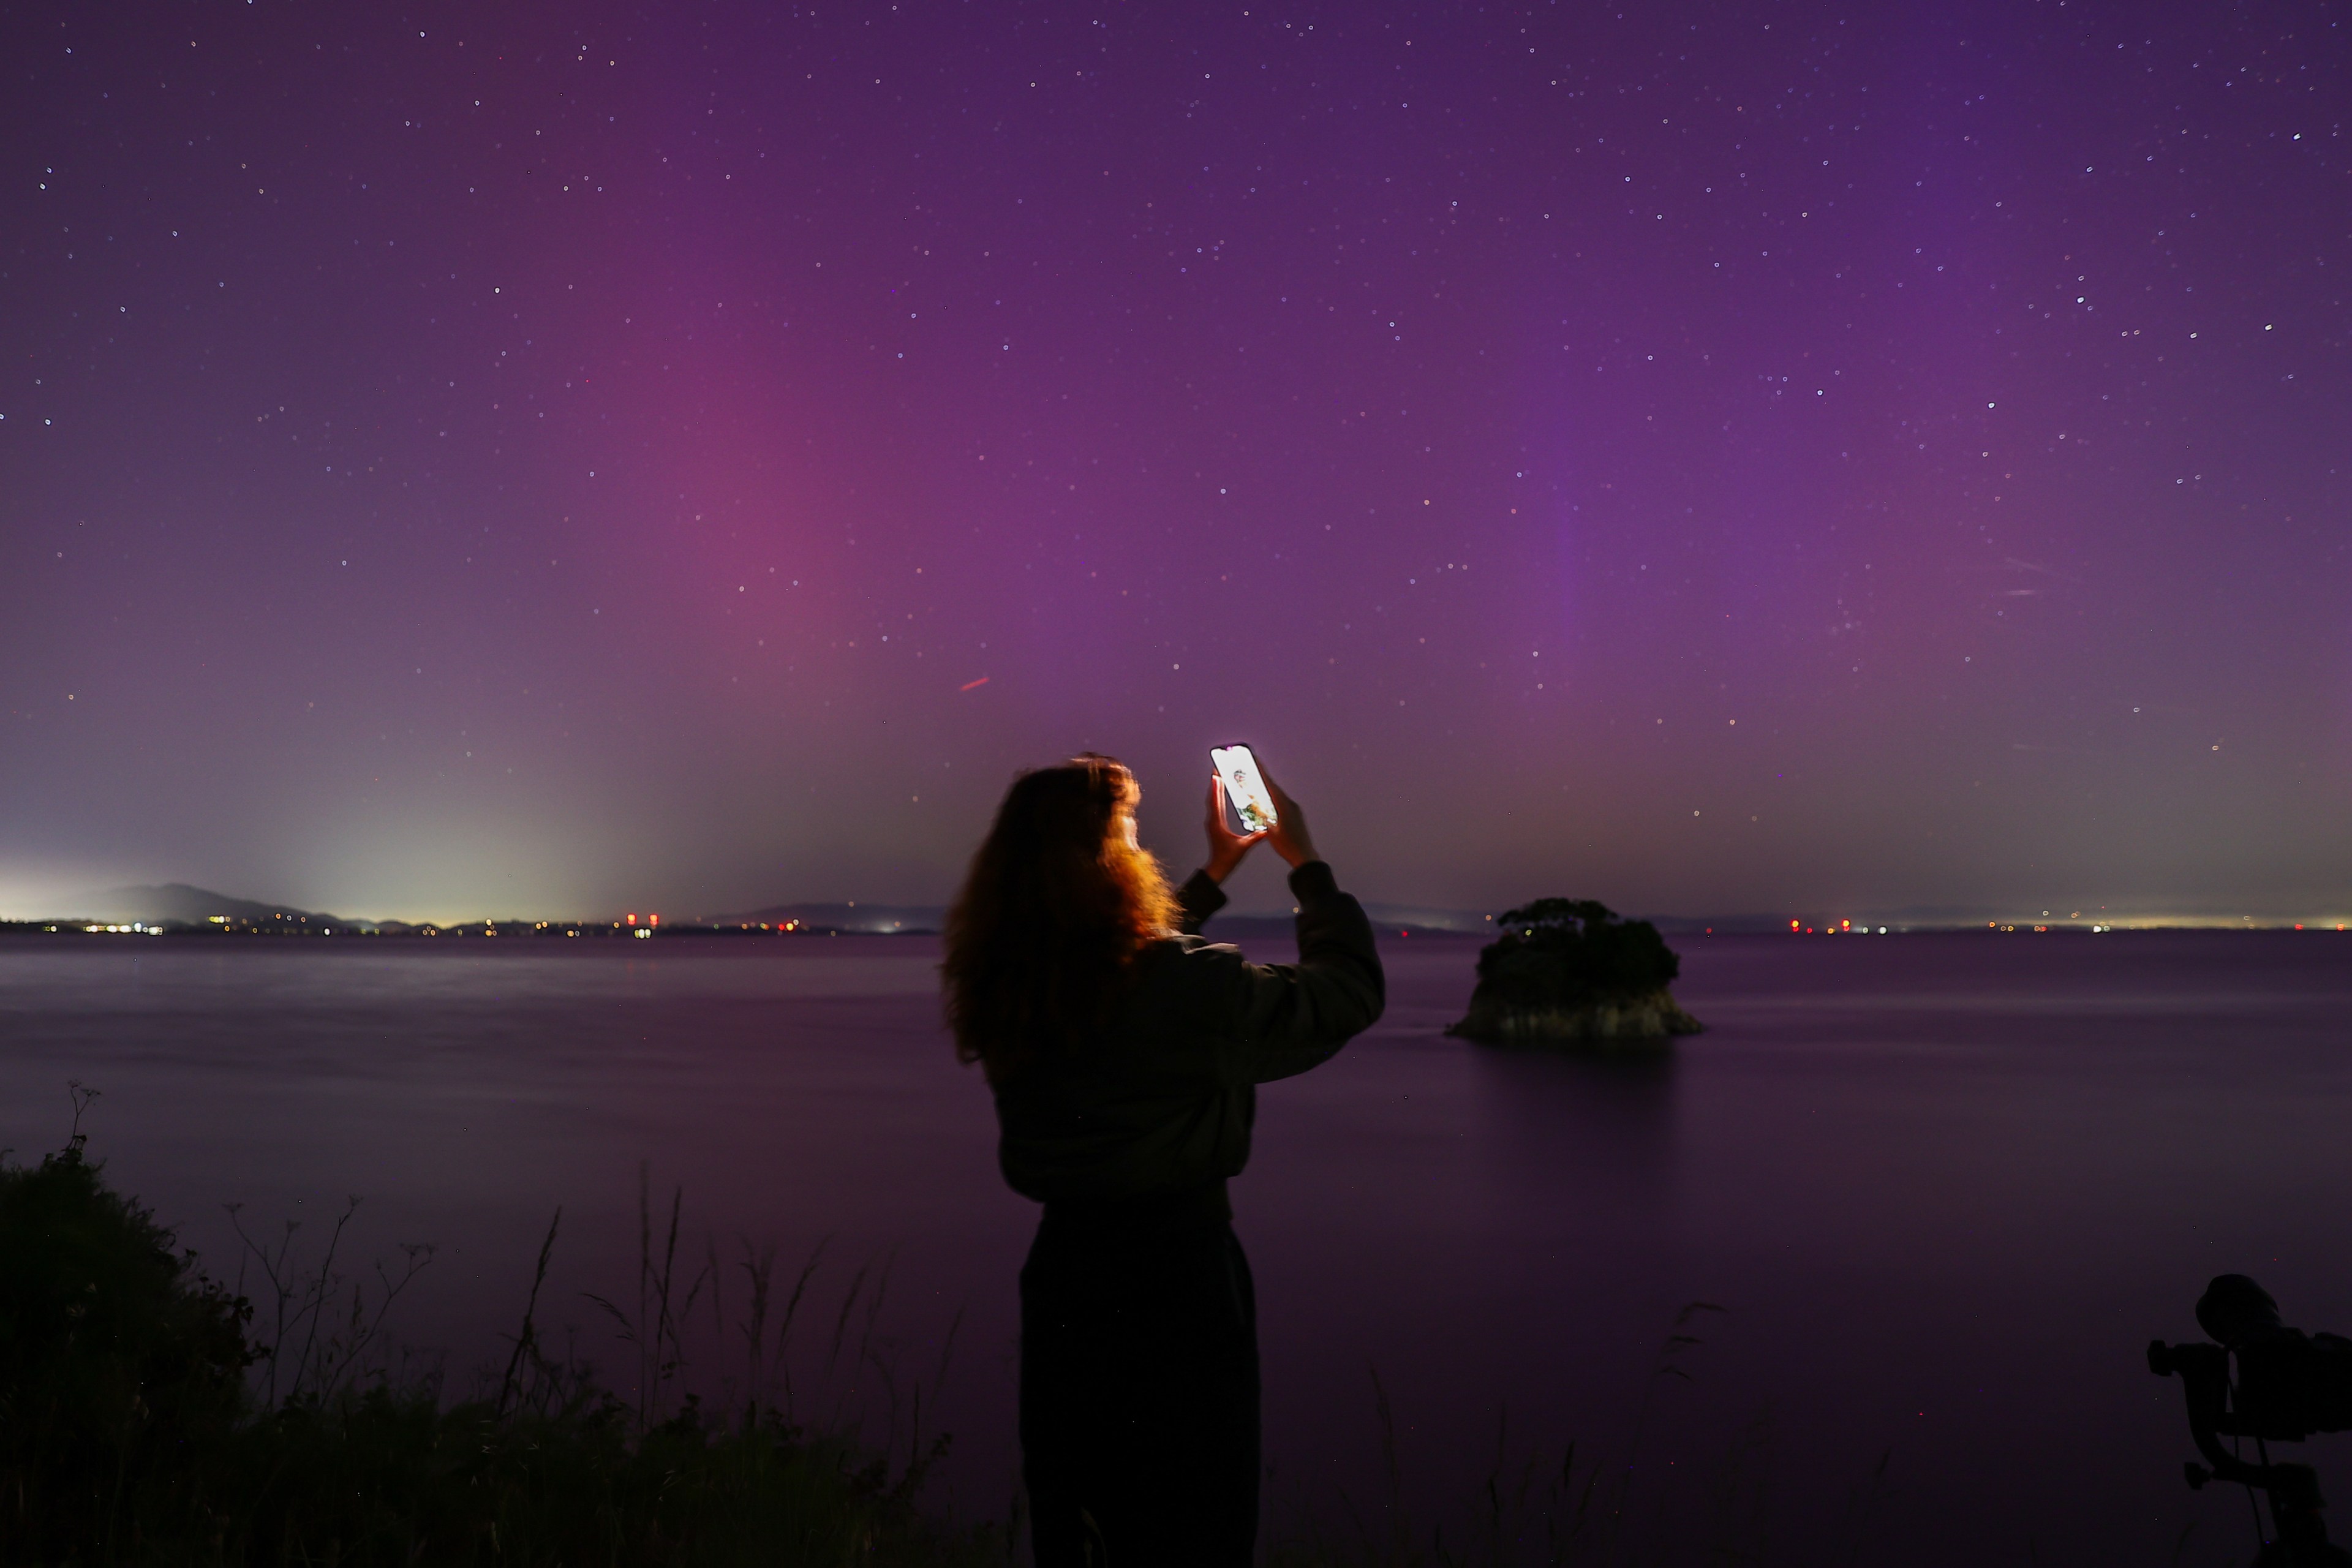 A person is taking a picture of aurora-like lights in a starry night sky over a calm lake with their phone.